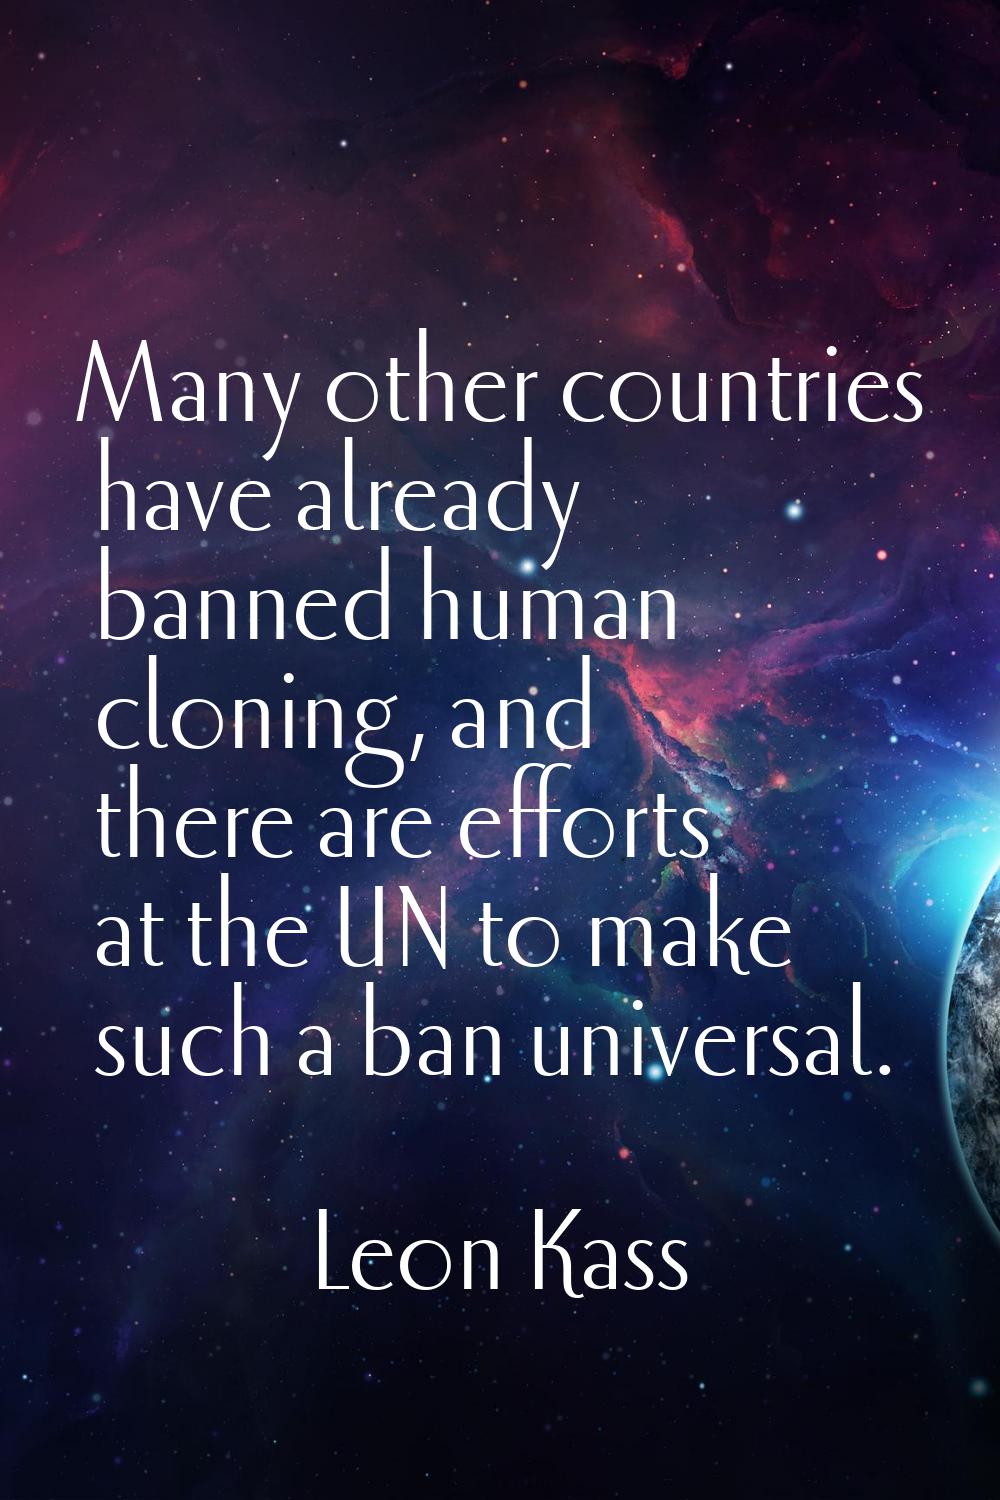 Many other countries have already banned human cloning, and there are efforts at the UN to make suc